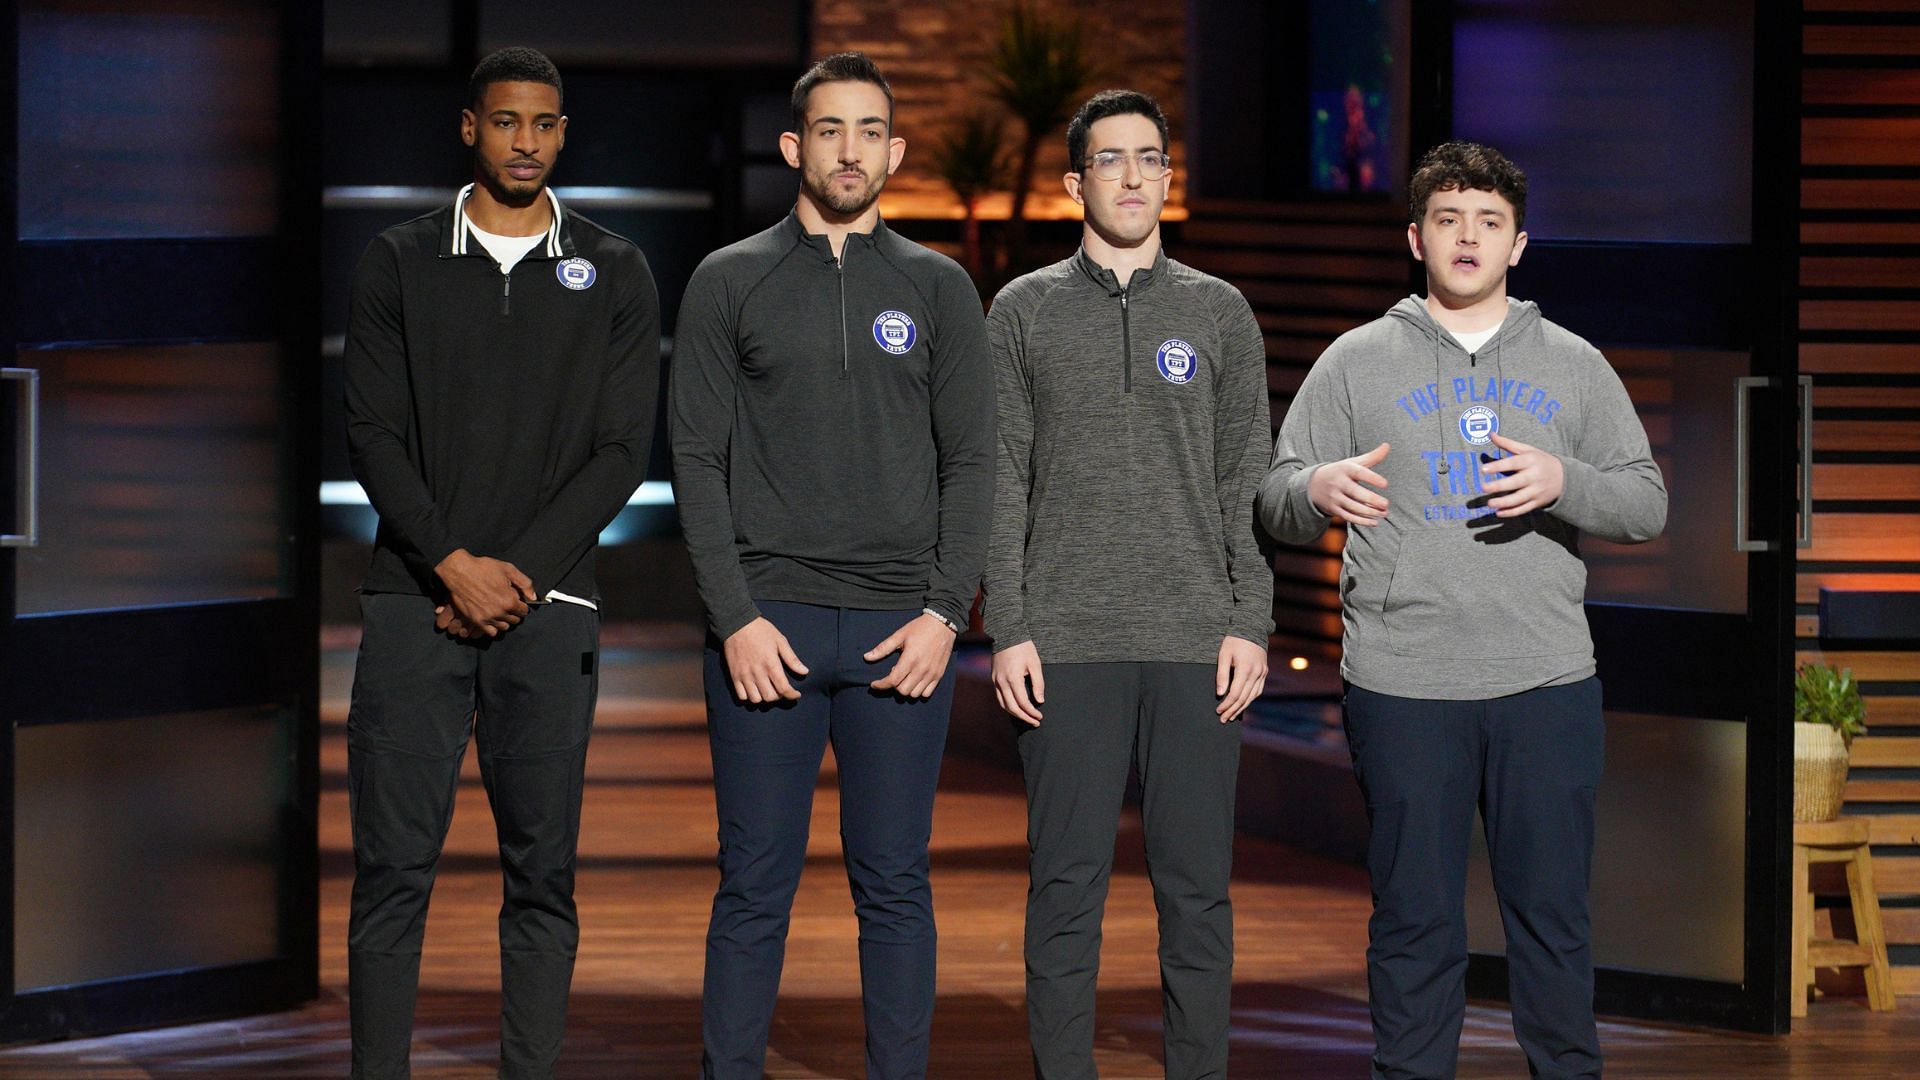 Founders of The Players Trunk appear on Shark Tank season finale (Image via Christopher Willard/ABC)